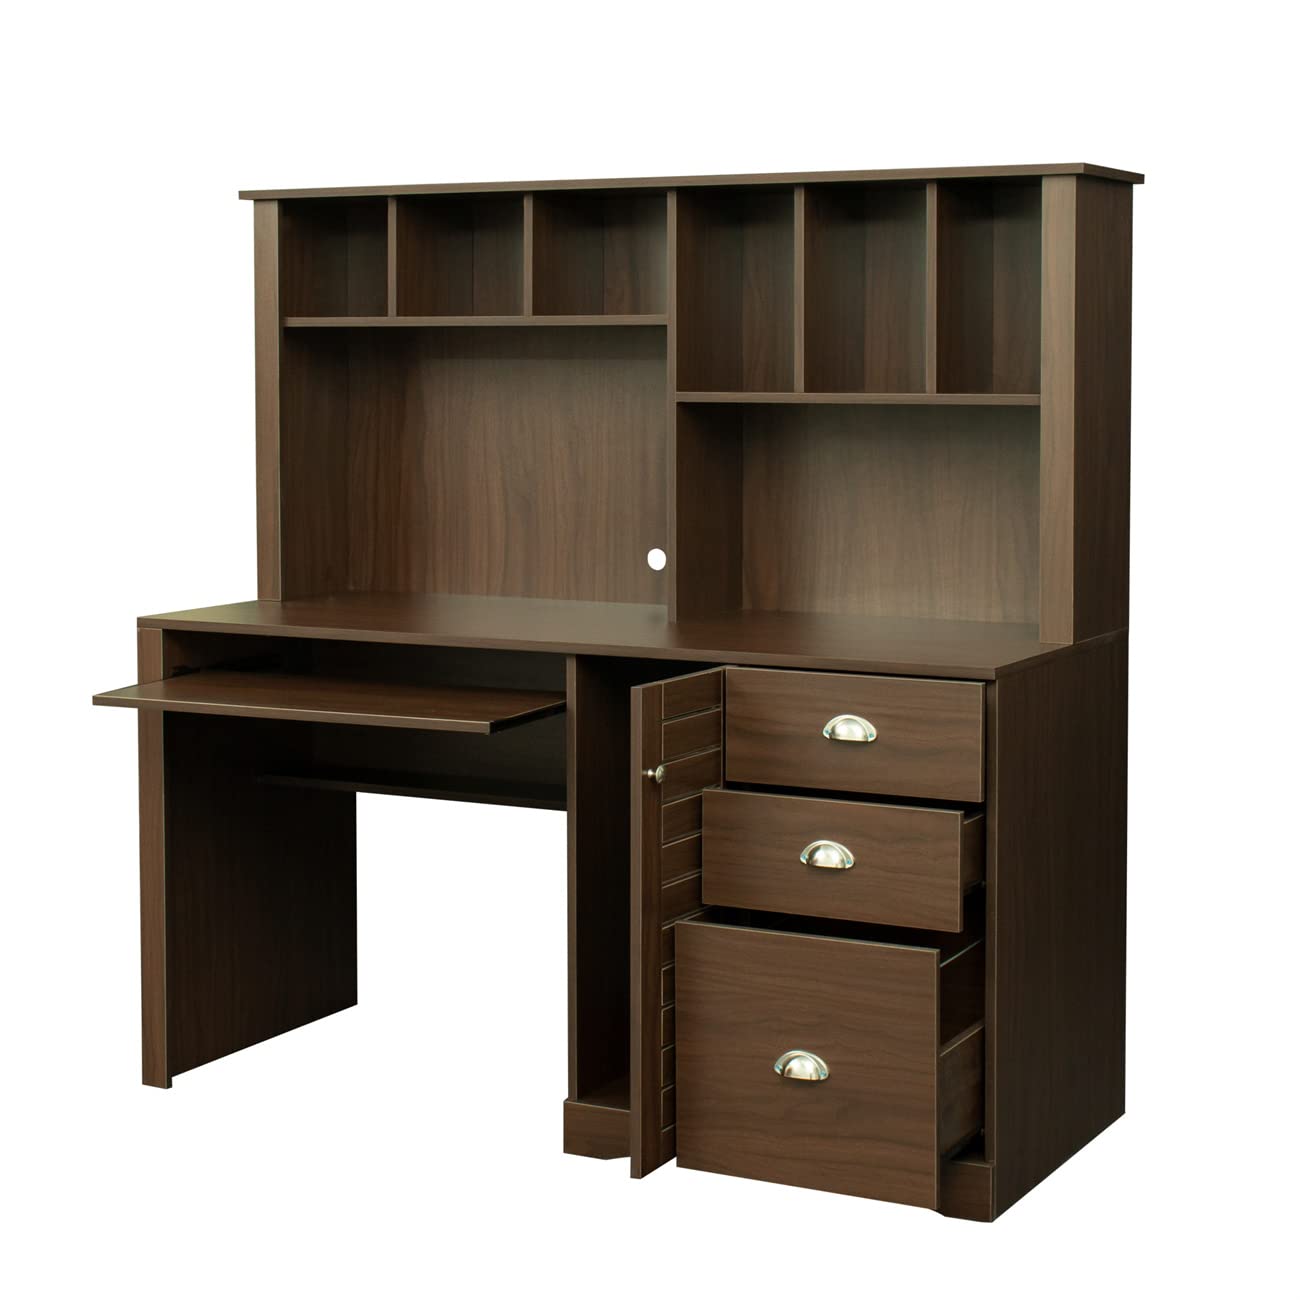 Computer Desk, Modern Wooden Home Office Desk Student Desk with Drawers and Bookshelf, Multifunctional Computer Desk Writing Table with Keyboard and Hutch for Small Space Bedroom Study, Walnut